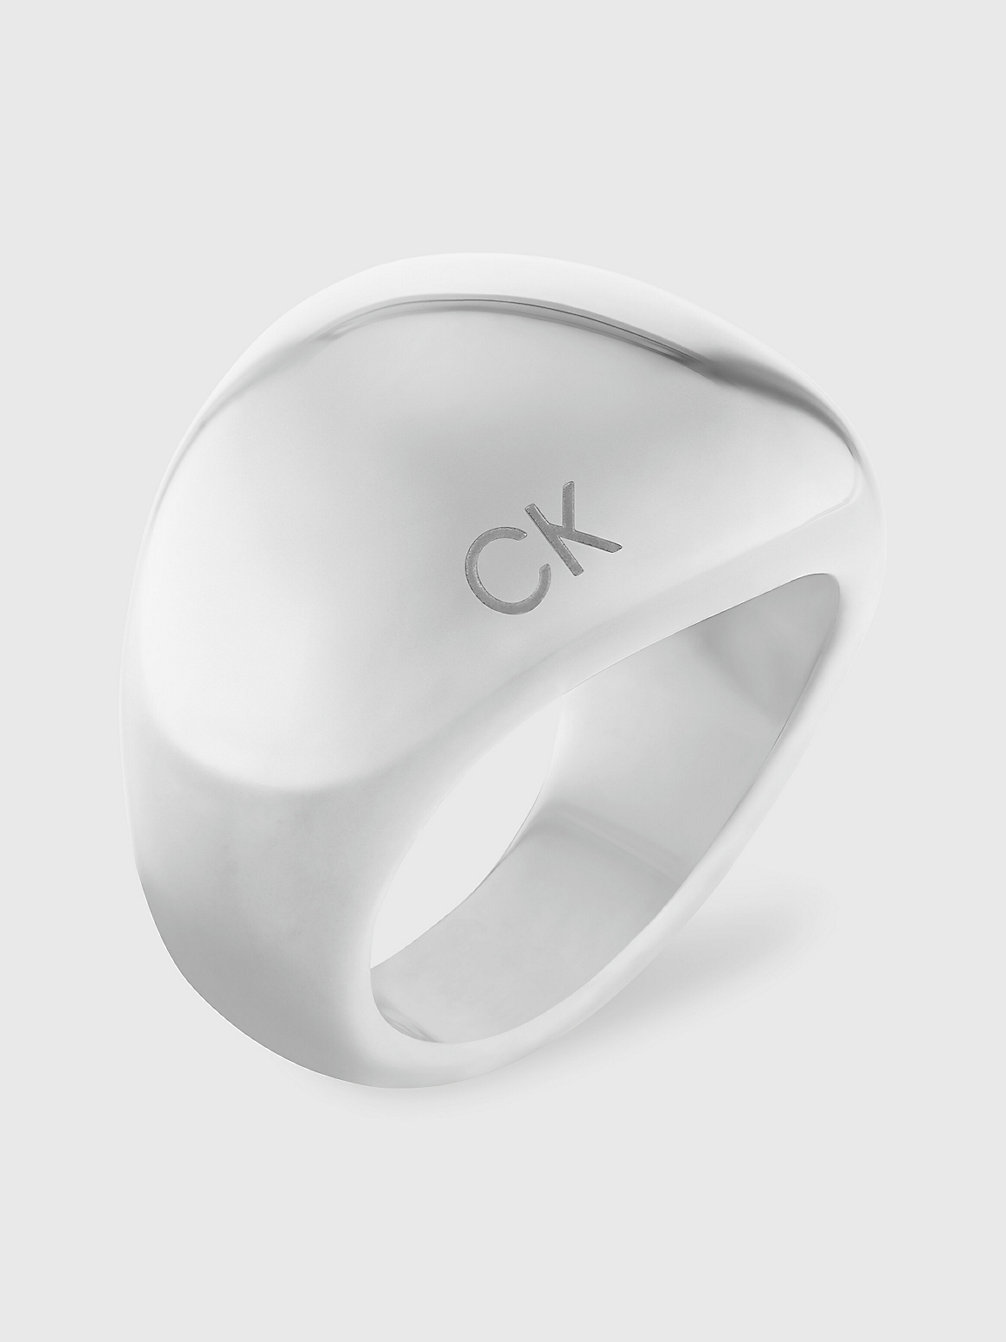 SILVER Ring - Playful Organic Shapes undefined women Calvin Klein